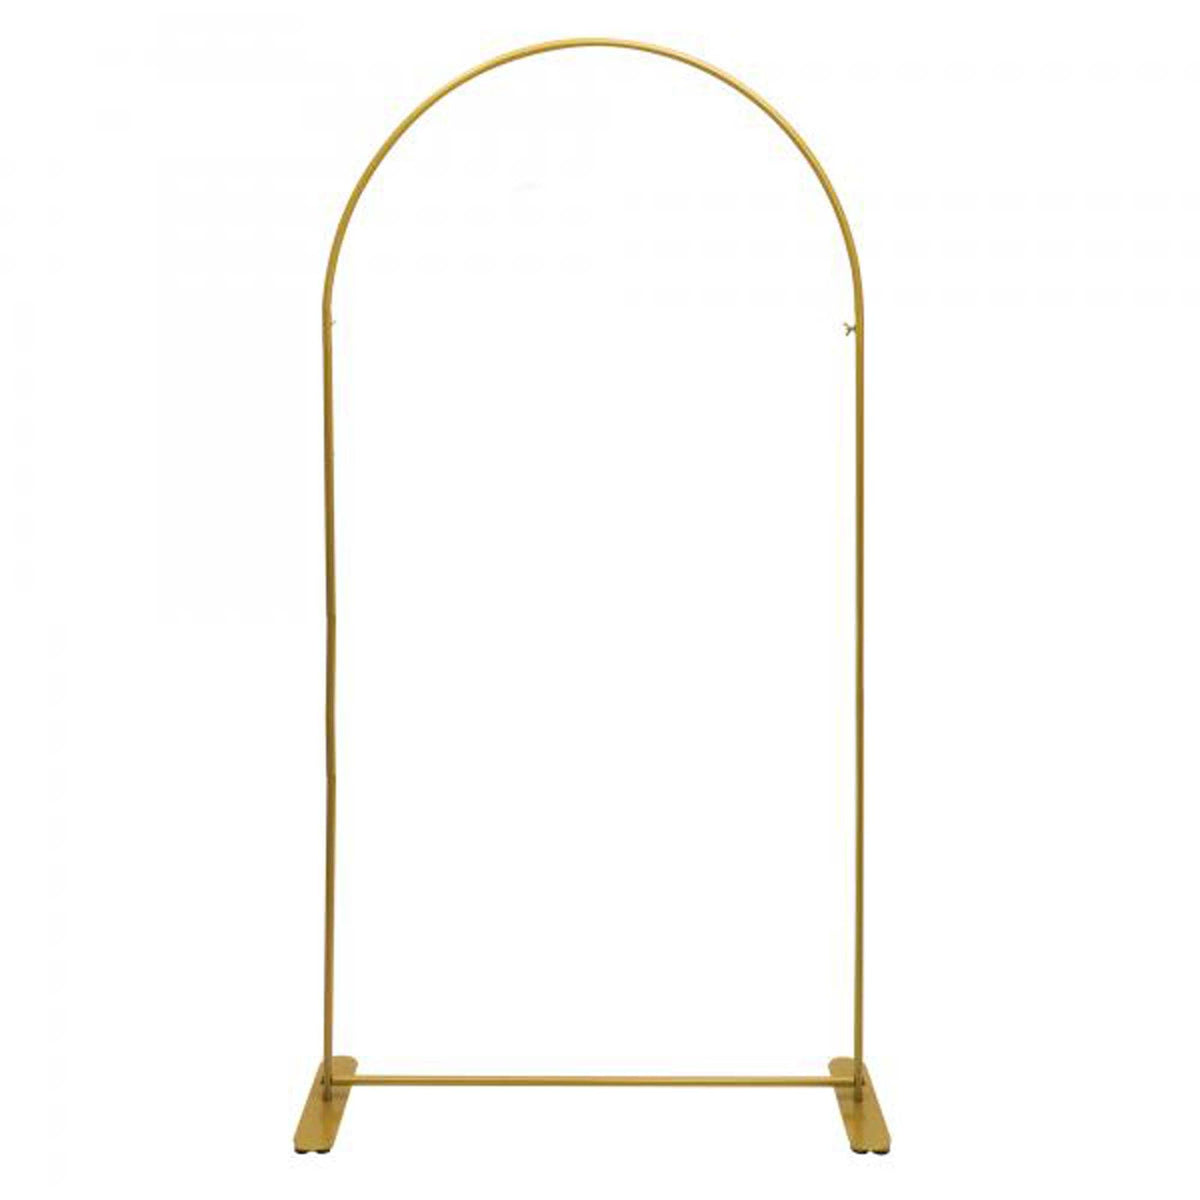 PORTOFINO INTERNATIONAL TRADING USA Balloons Gold Metal Arch Backdrop Stand, 36 x 16 x 72 Inches, 1 Count 745910759913